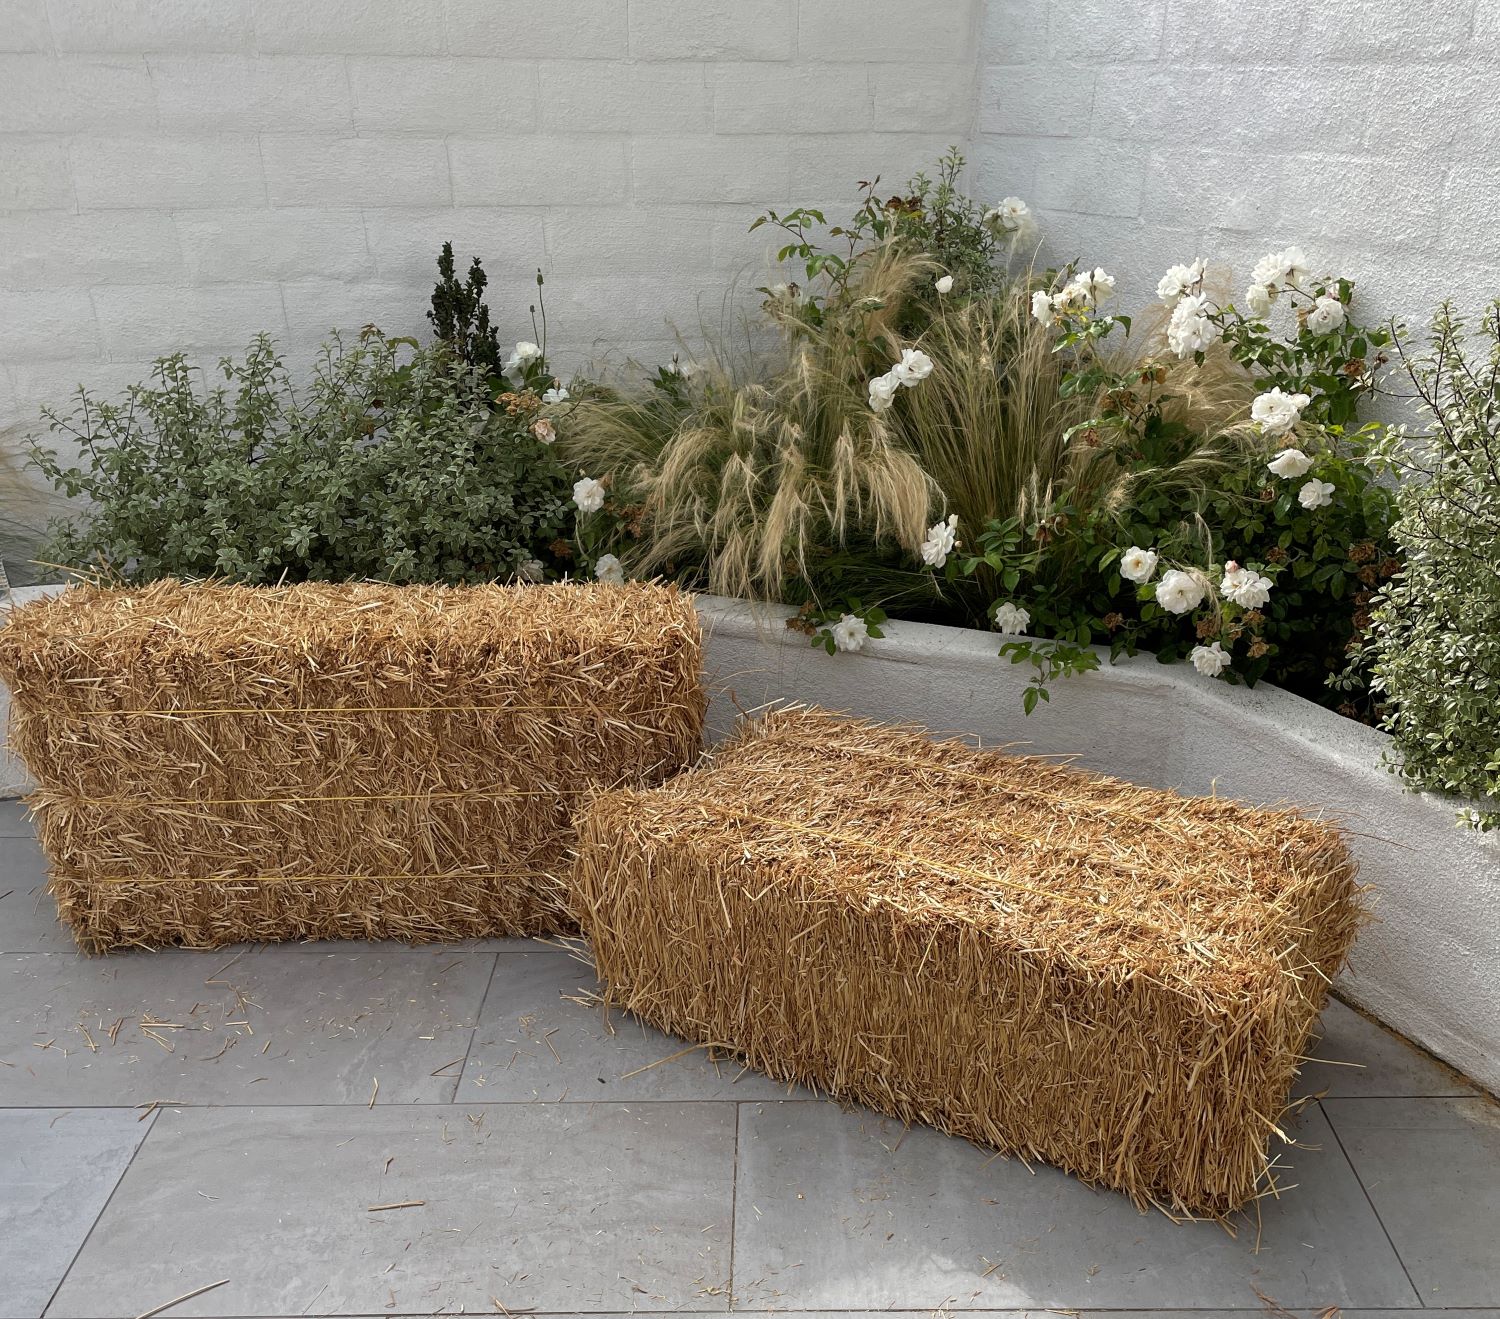 Straw Bales and Straw Mats